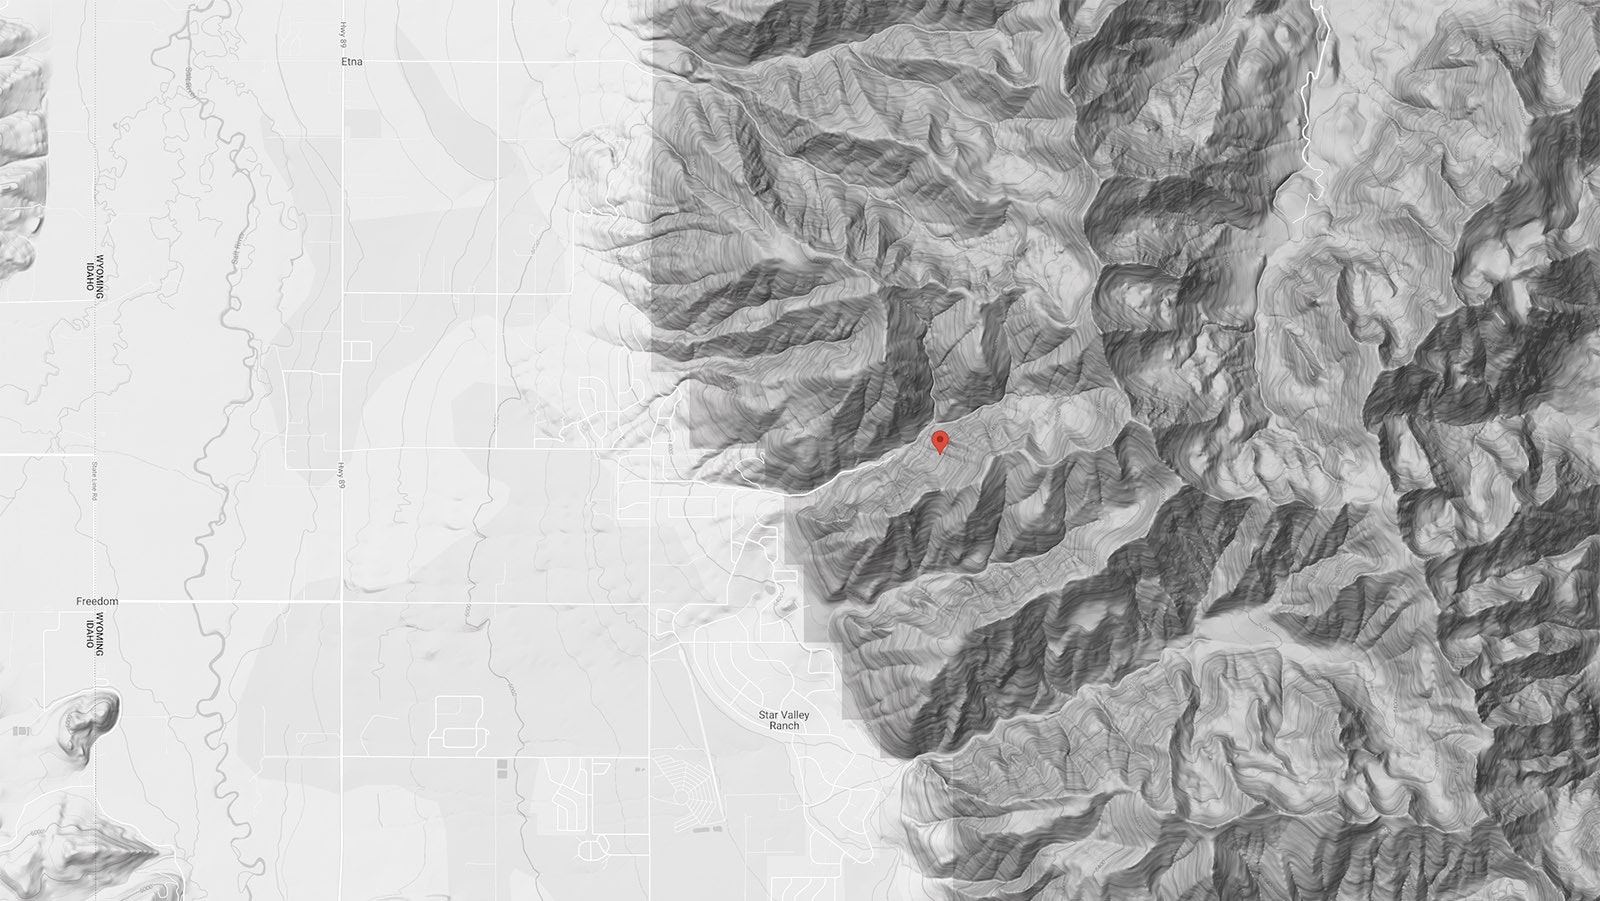 The red dot shows where a backcountry skier got caught and killed in an avalanche Sunday morning.